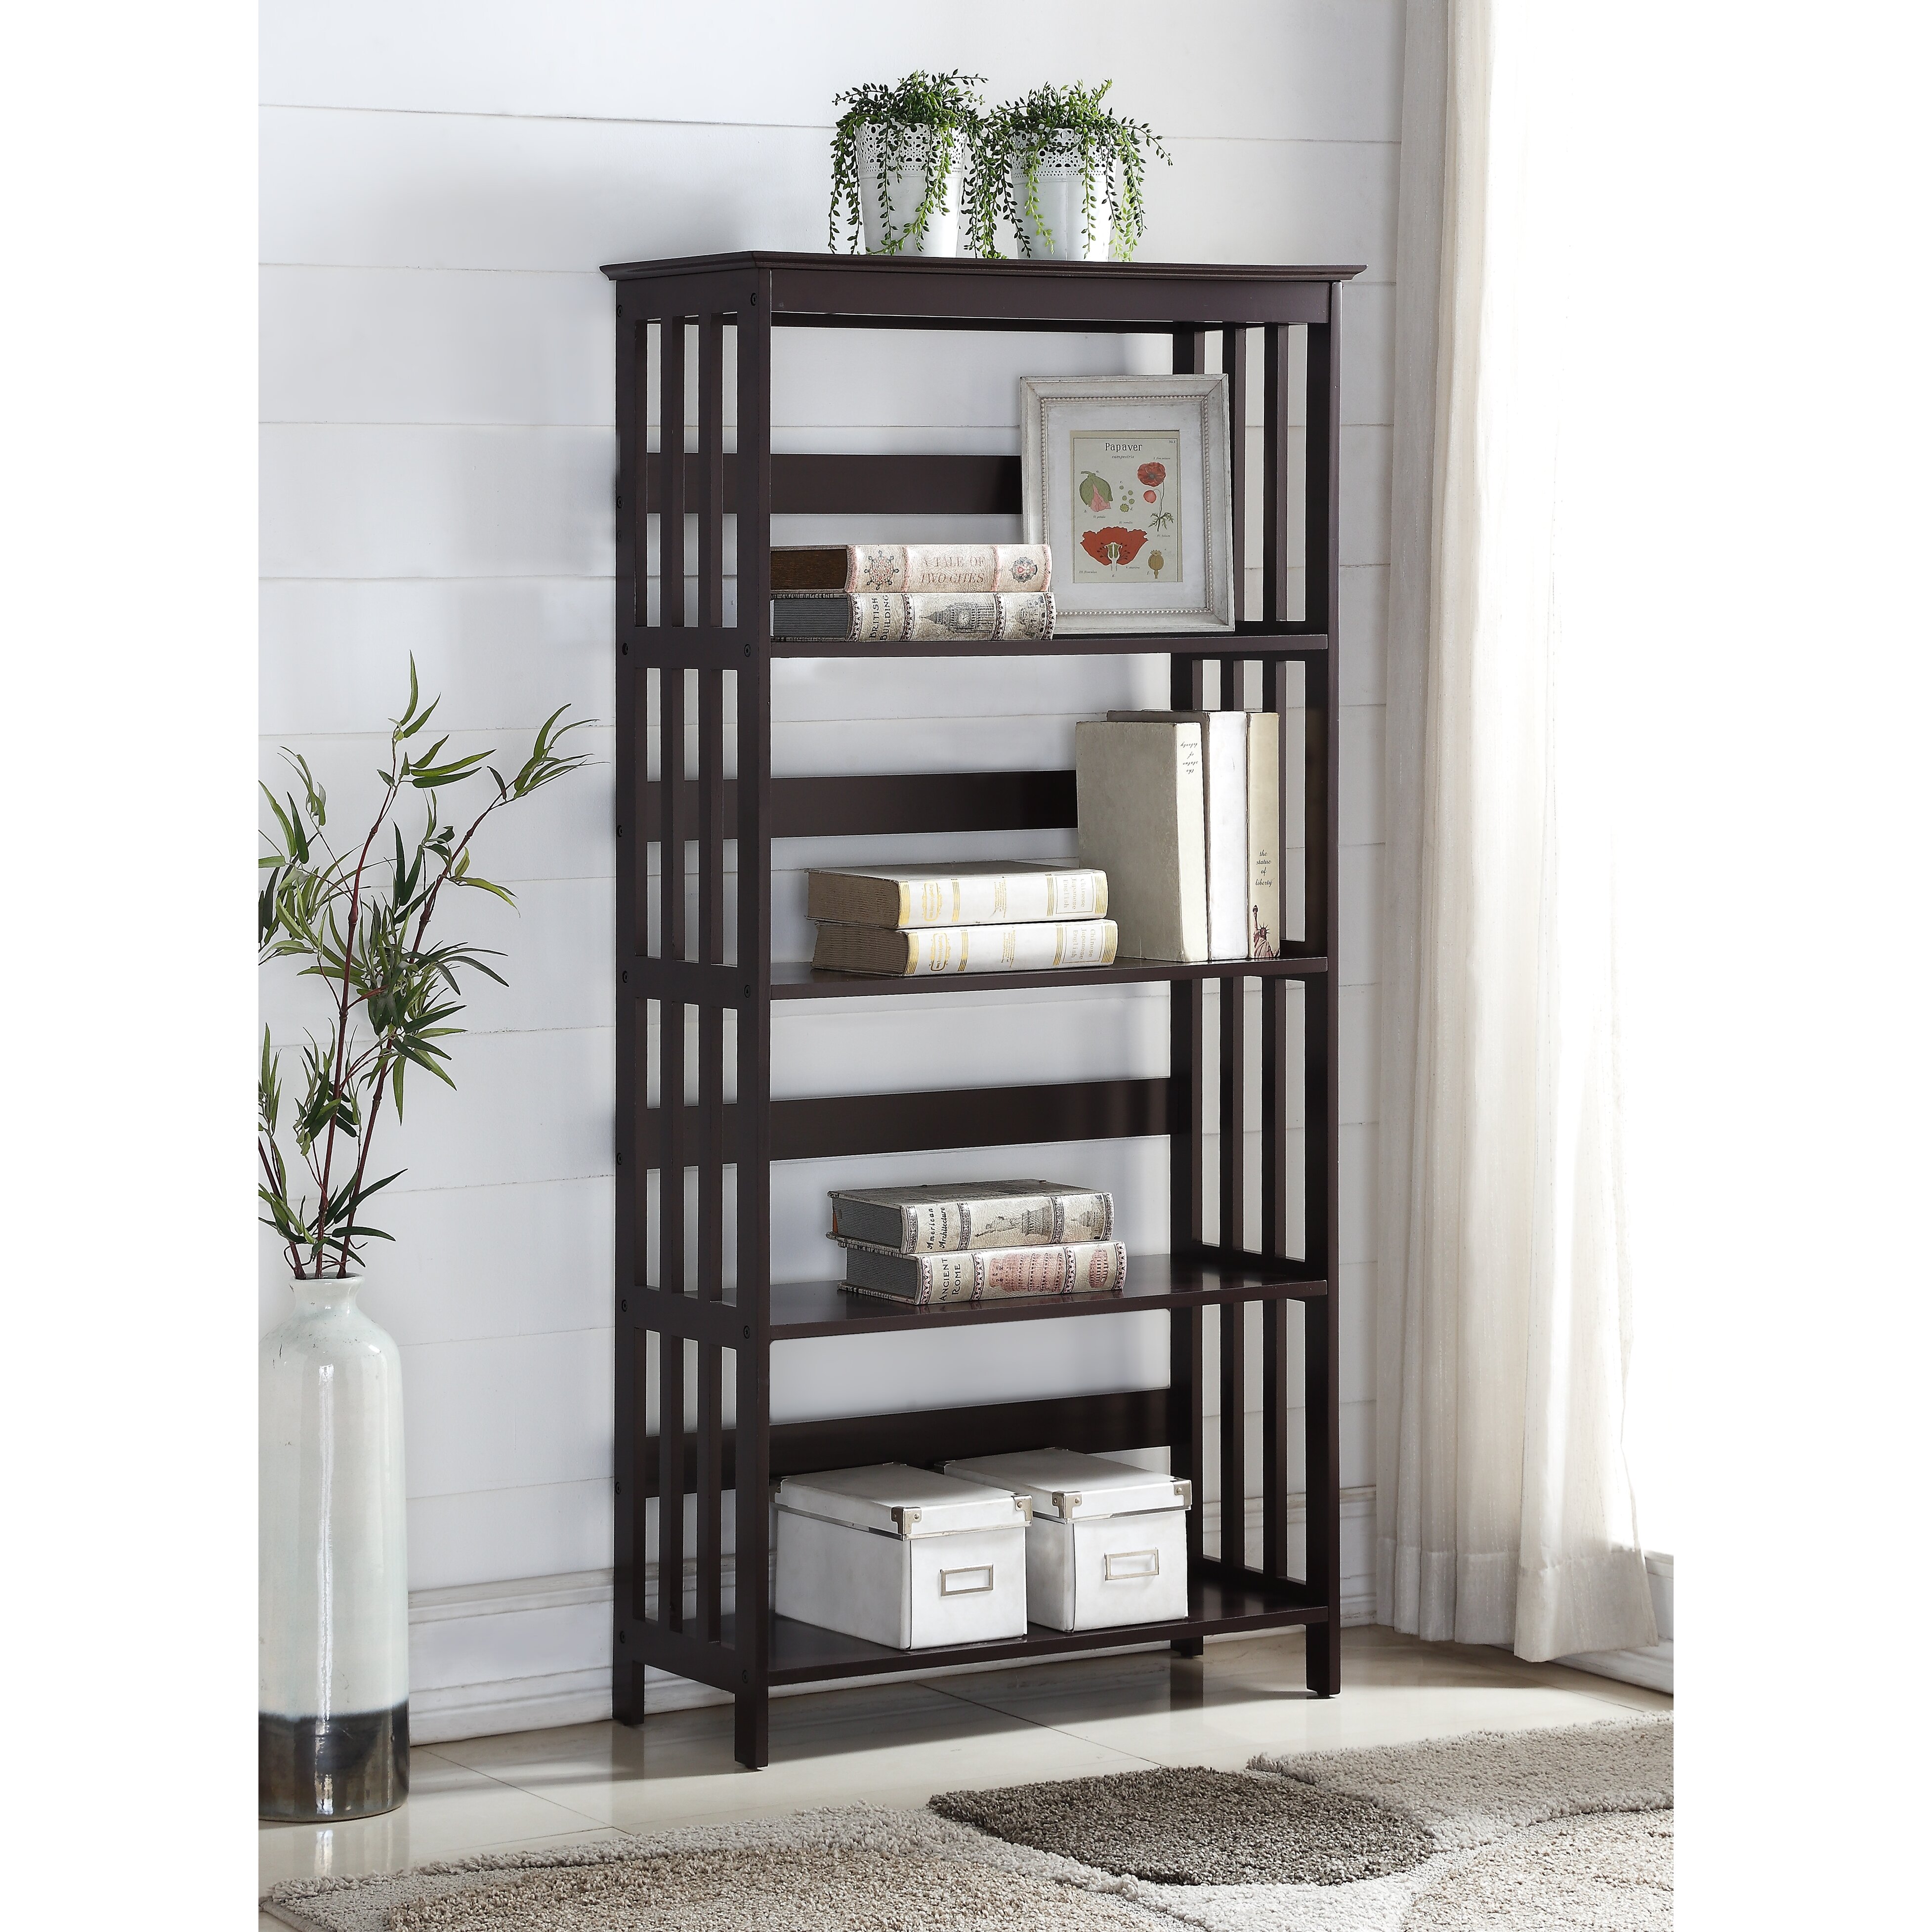 Minimalist Wayfair Bookcase for Small Space